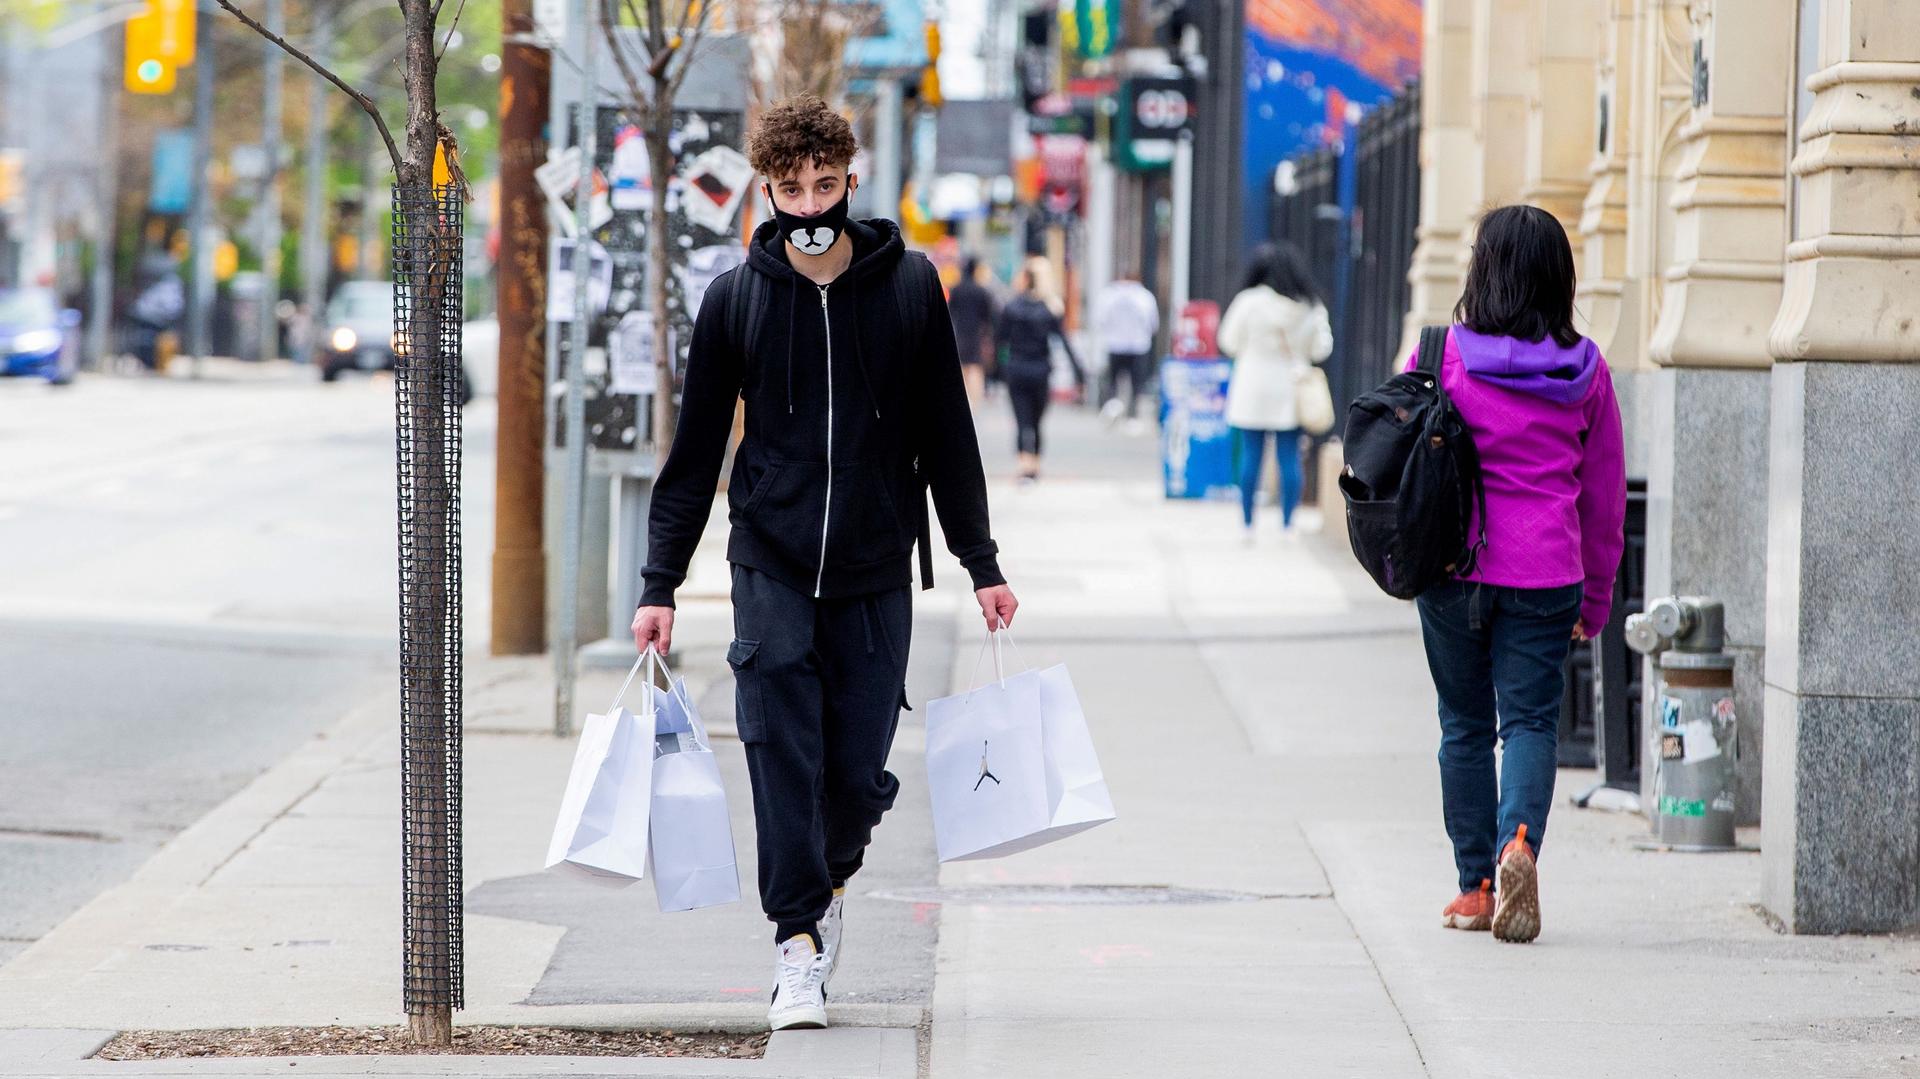 Nick Abrantes walks after purchased three pairs of shoes during a phased reopening from the coronavirus disease (COVID-19) restrictions in Toronto, Ontario, Canada May 19, 2020. REUTERS/Carlos Osorio/File Photo